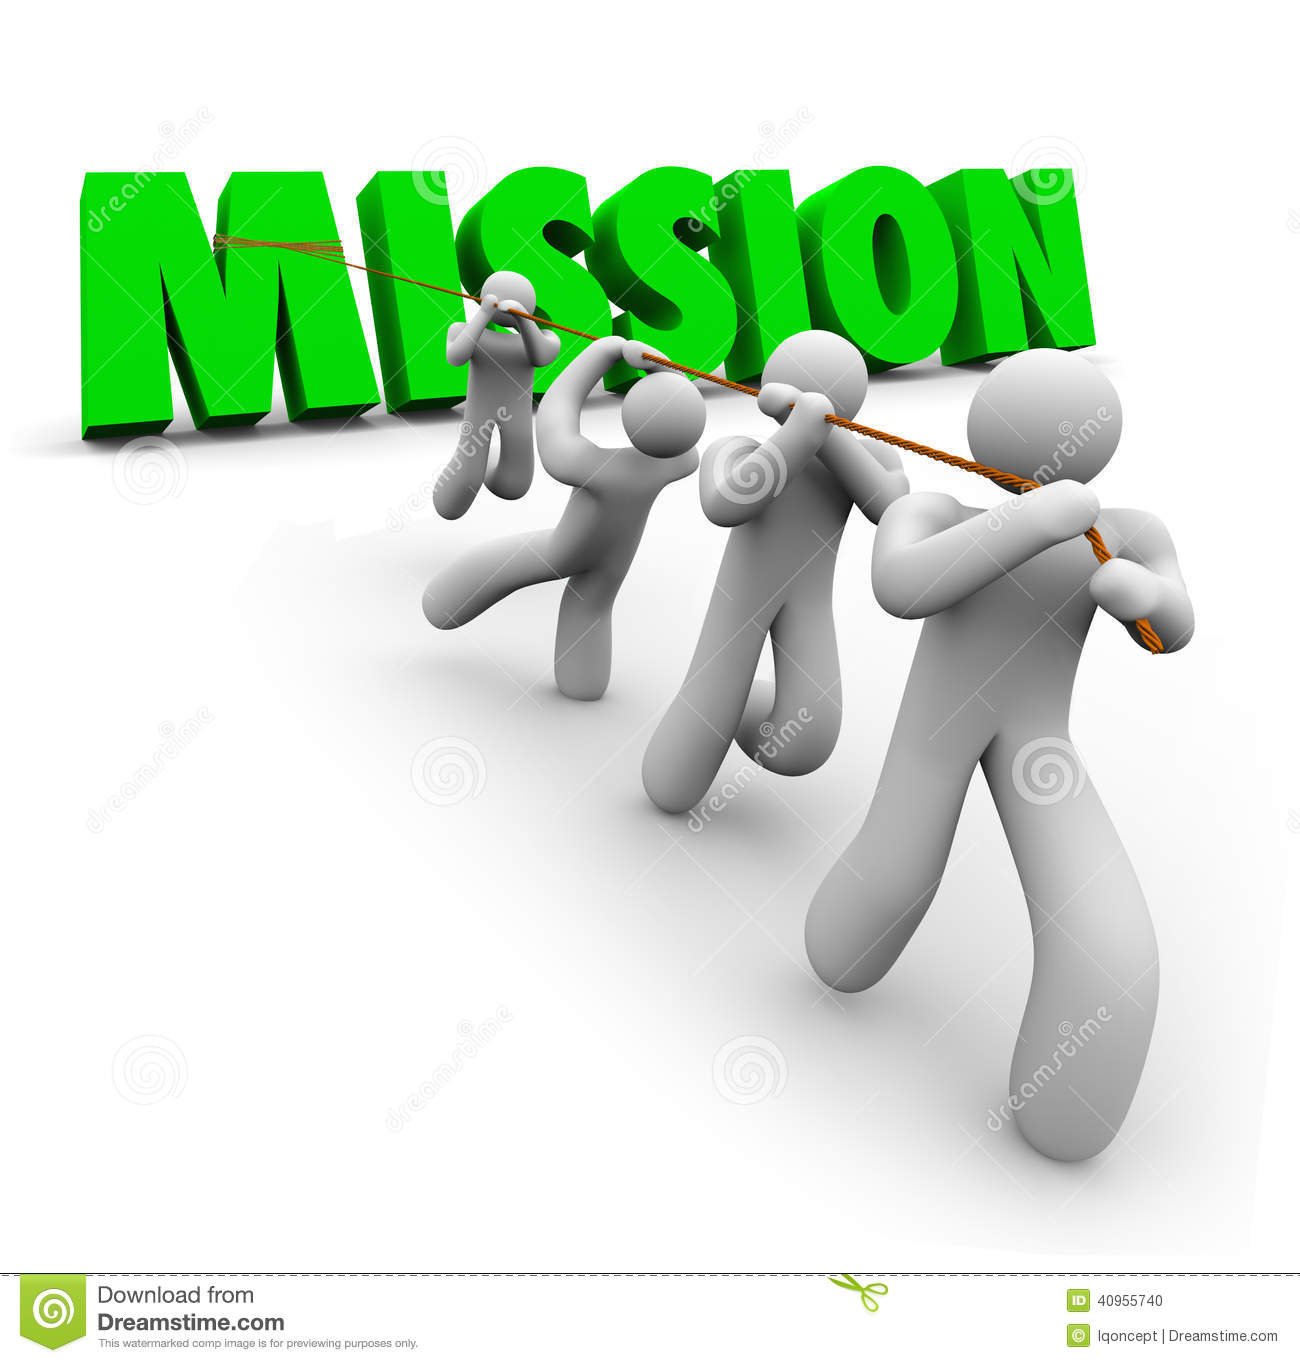 Colorful Mission Trip clipart free image download - Clip Art Library